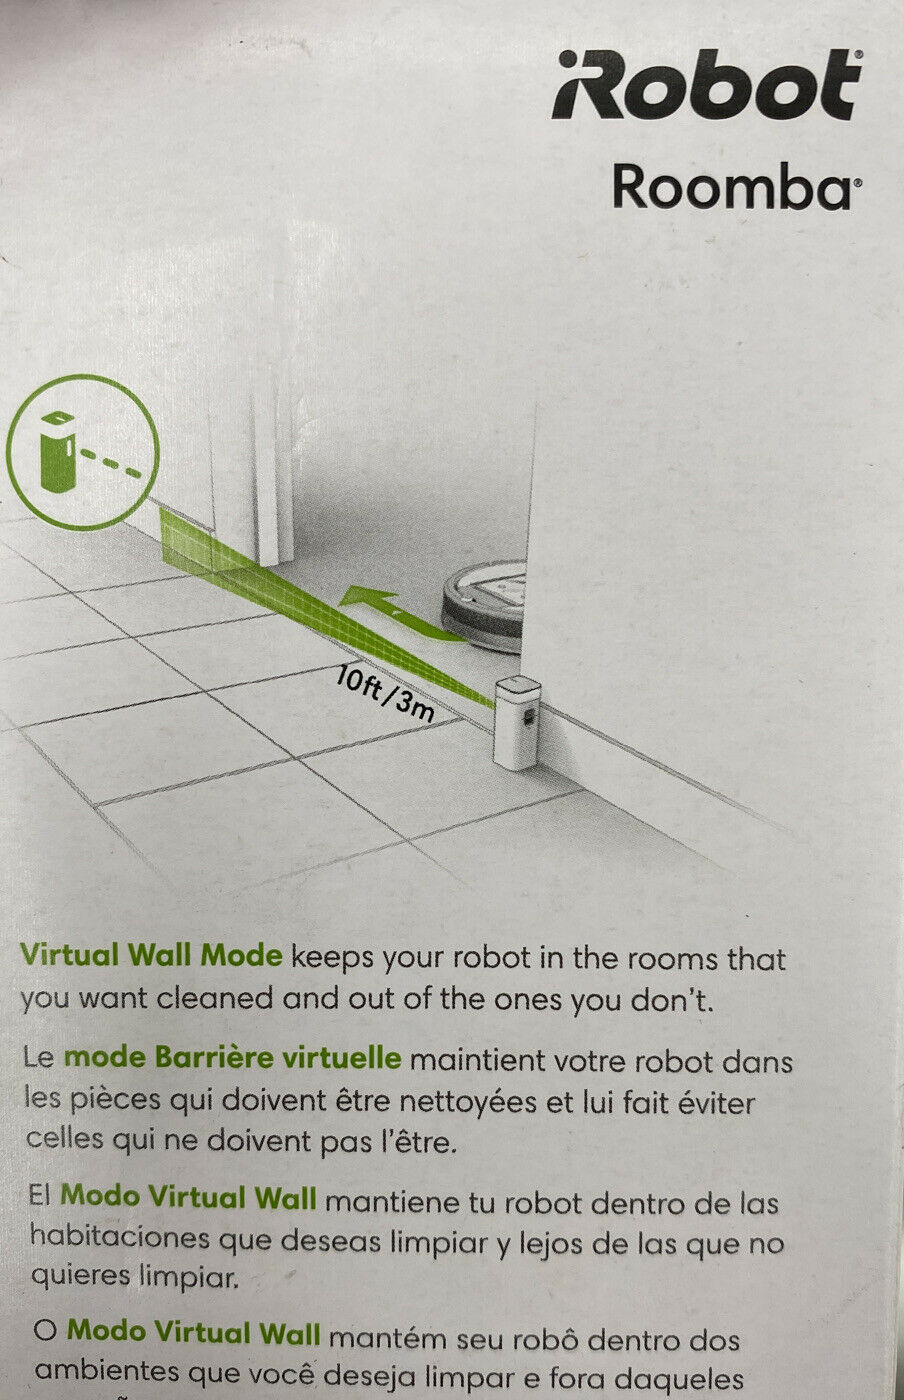 Barrière virtuelle Virtual Wall double fonction Roomba®